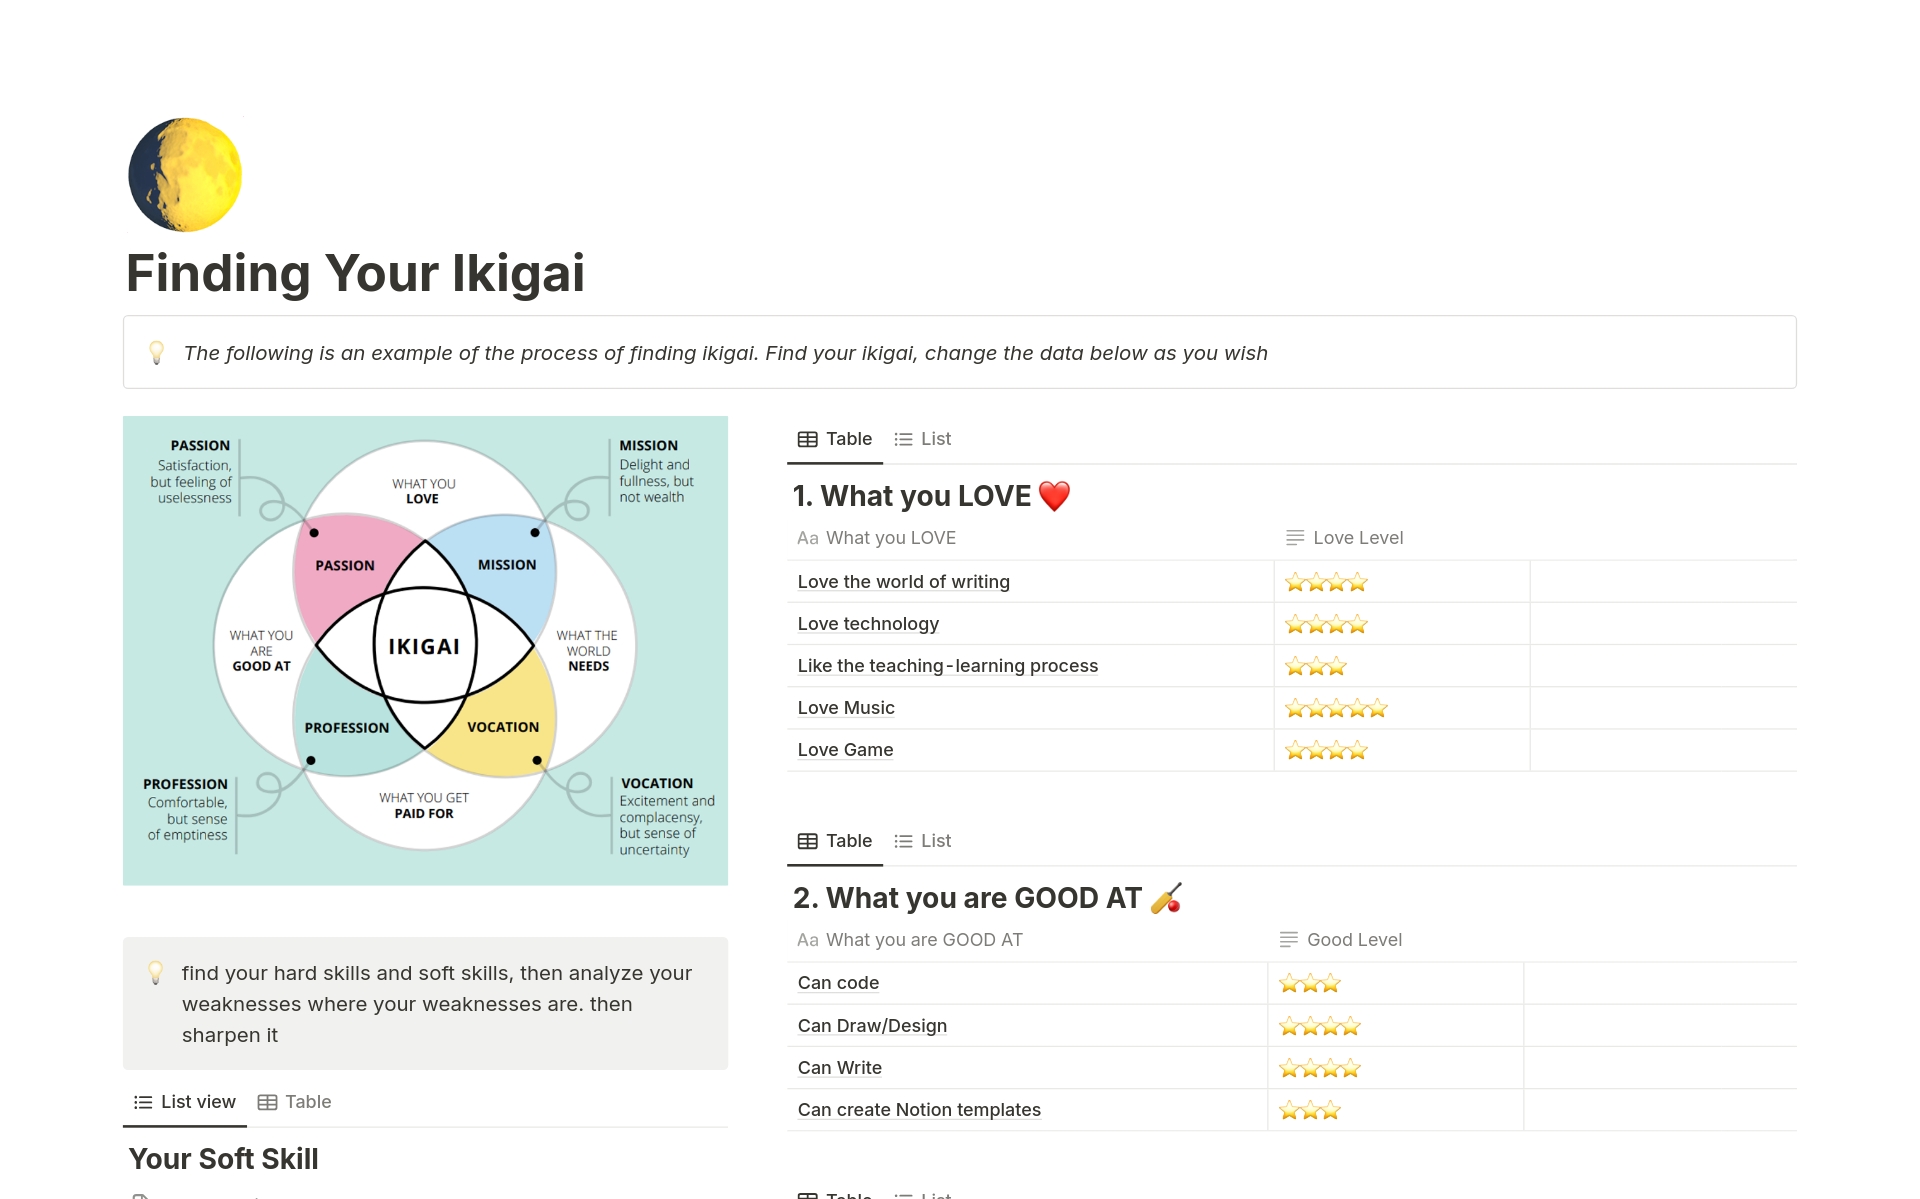 Guide to Finding Ikigai

Ikigai is a Japanese concept meaning "reason for being" or "reason to wake up in the morning." It combines four essential elements: what you love, what you are good at, what the world needs, and what you can be paid for. 